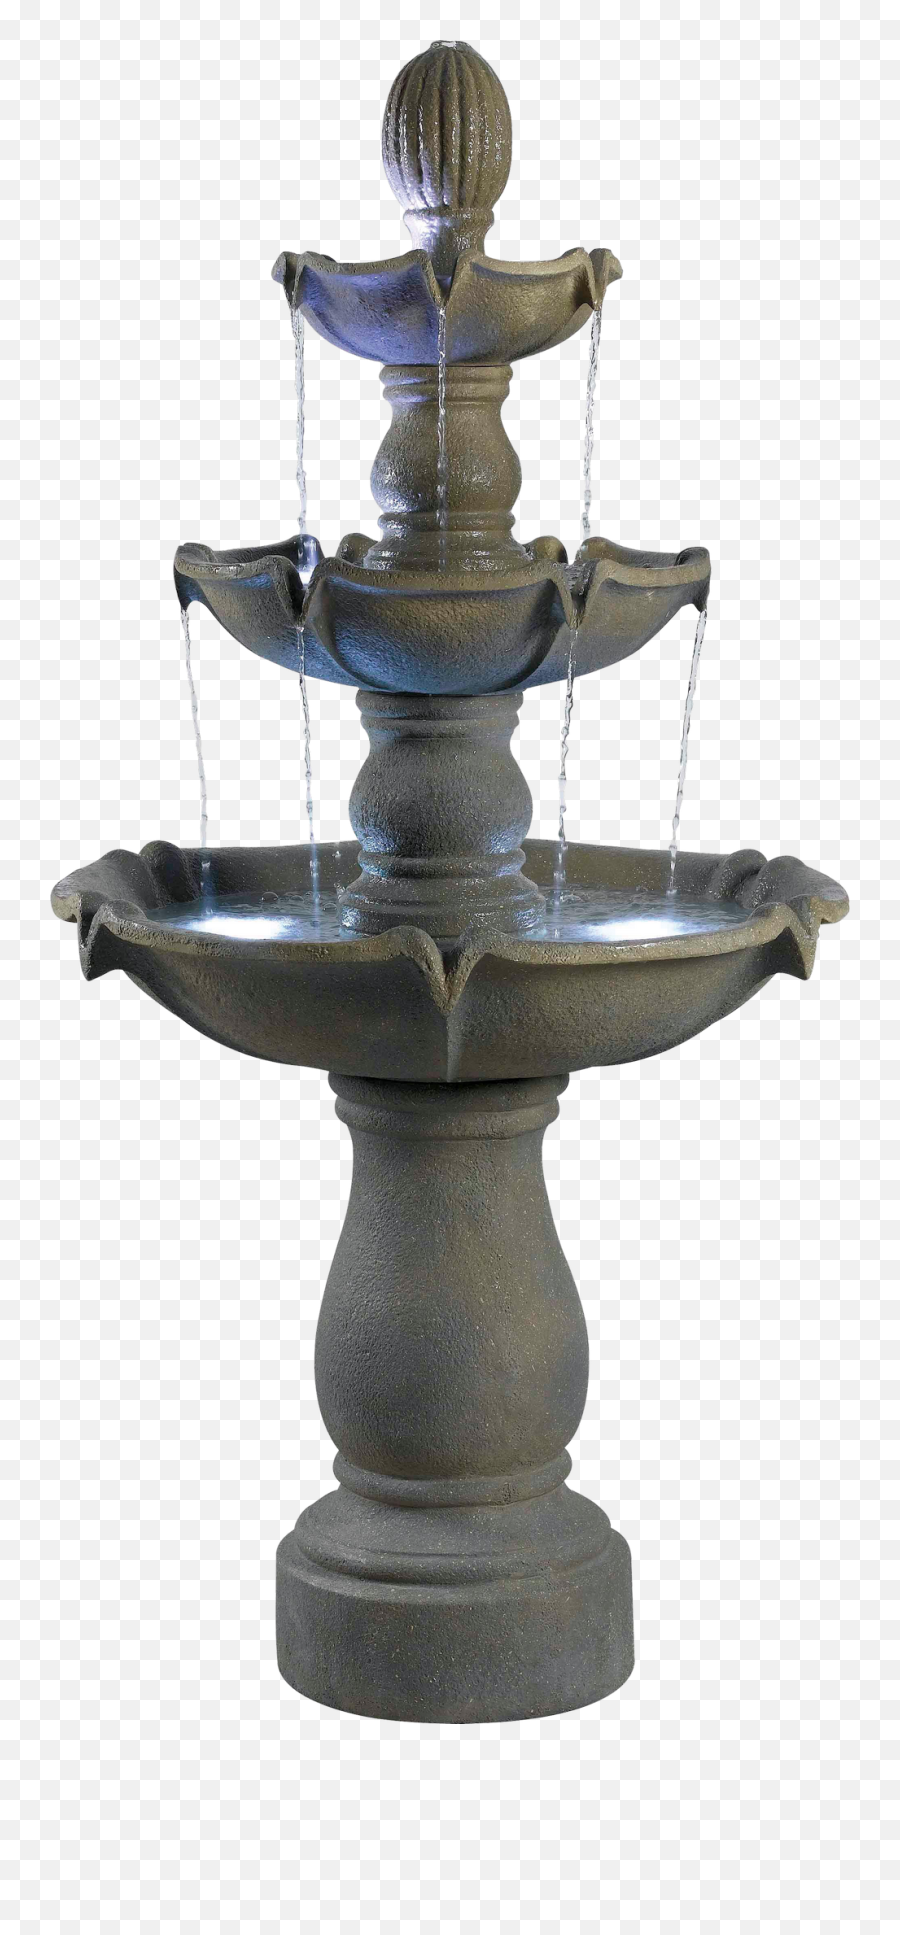 Fountain Png Image